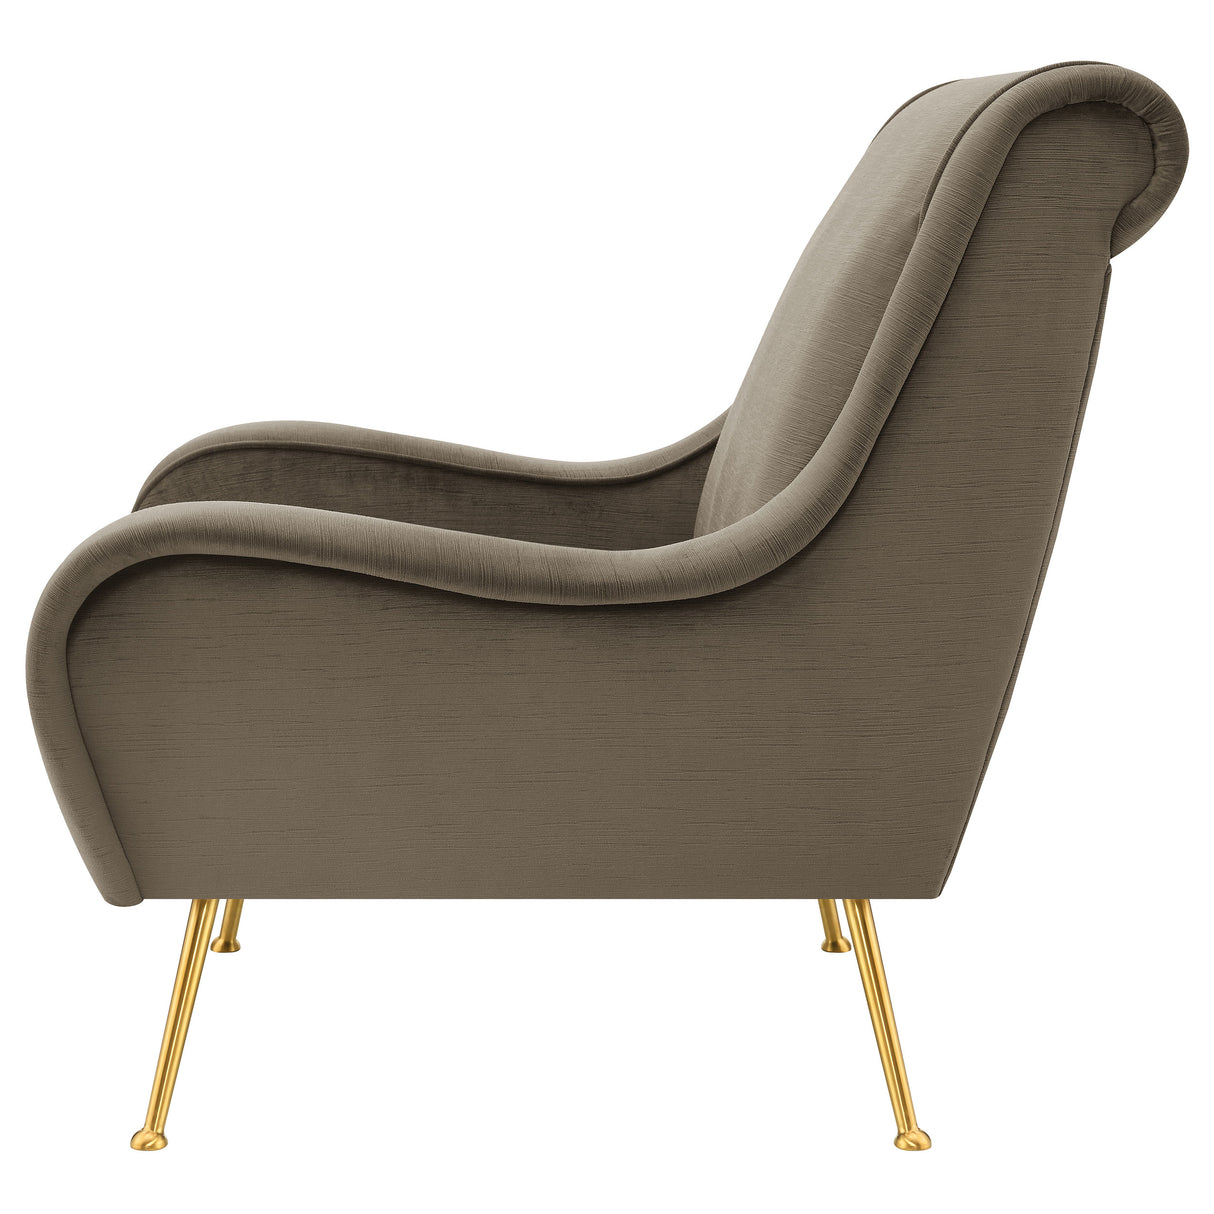 Accent Chair - Ricci Upholstered Saddle Arms Accent Chair Truffle and Gold